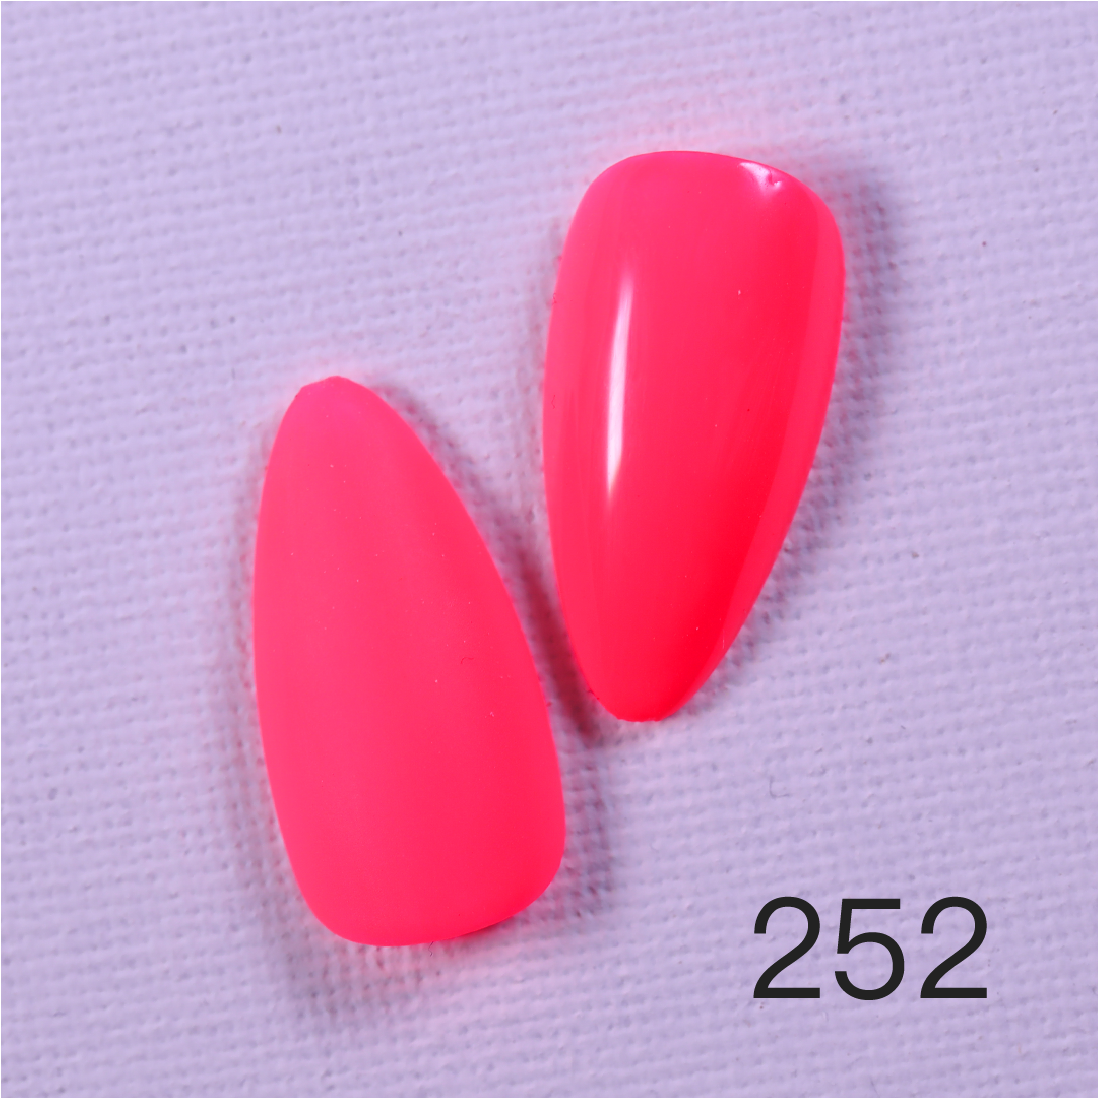 {{ GelPolish_USA }} GelPolish USA 252 GelPolish USA Mela Mela Gel Polish Colour - 80 colors available to choose from - {{ UV_Drying_machine}} - {{ Powerful_LED_Nail_Dryer}} {{ Gelish }} {{Gel_nail_polish}} {{ Gel_polish }}